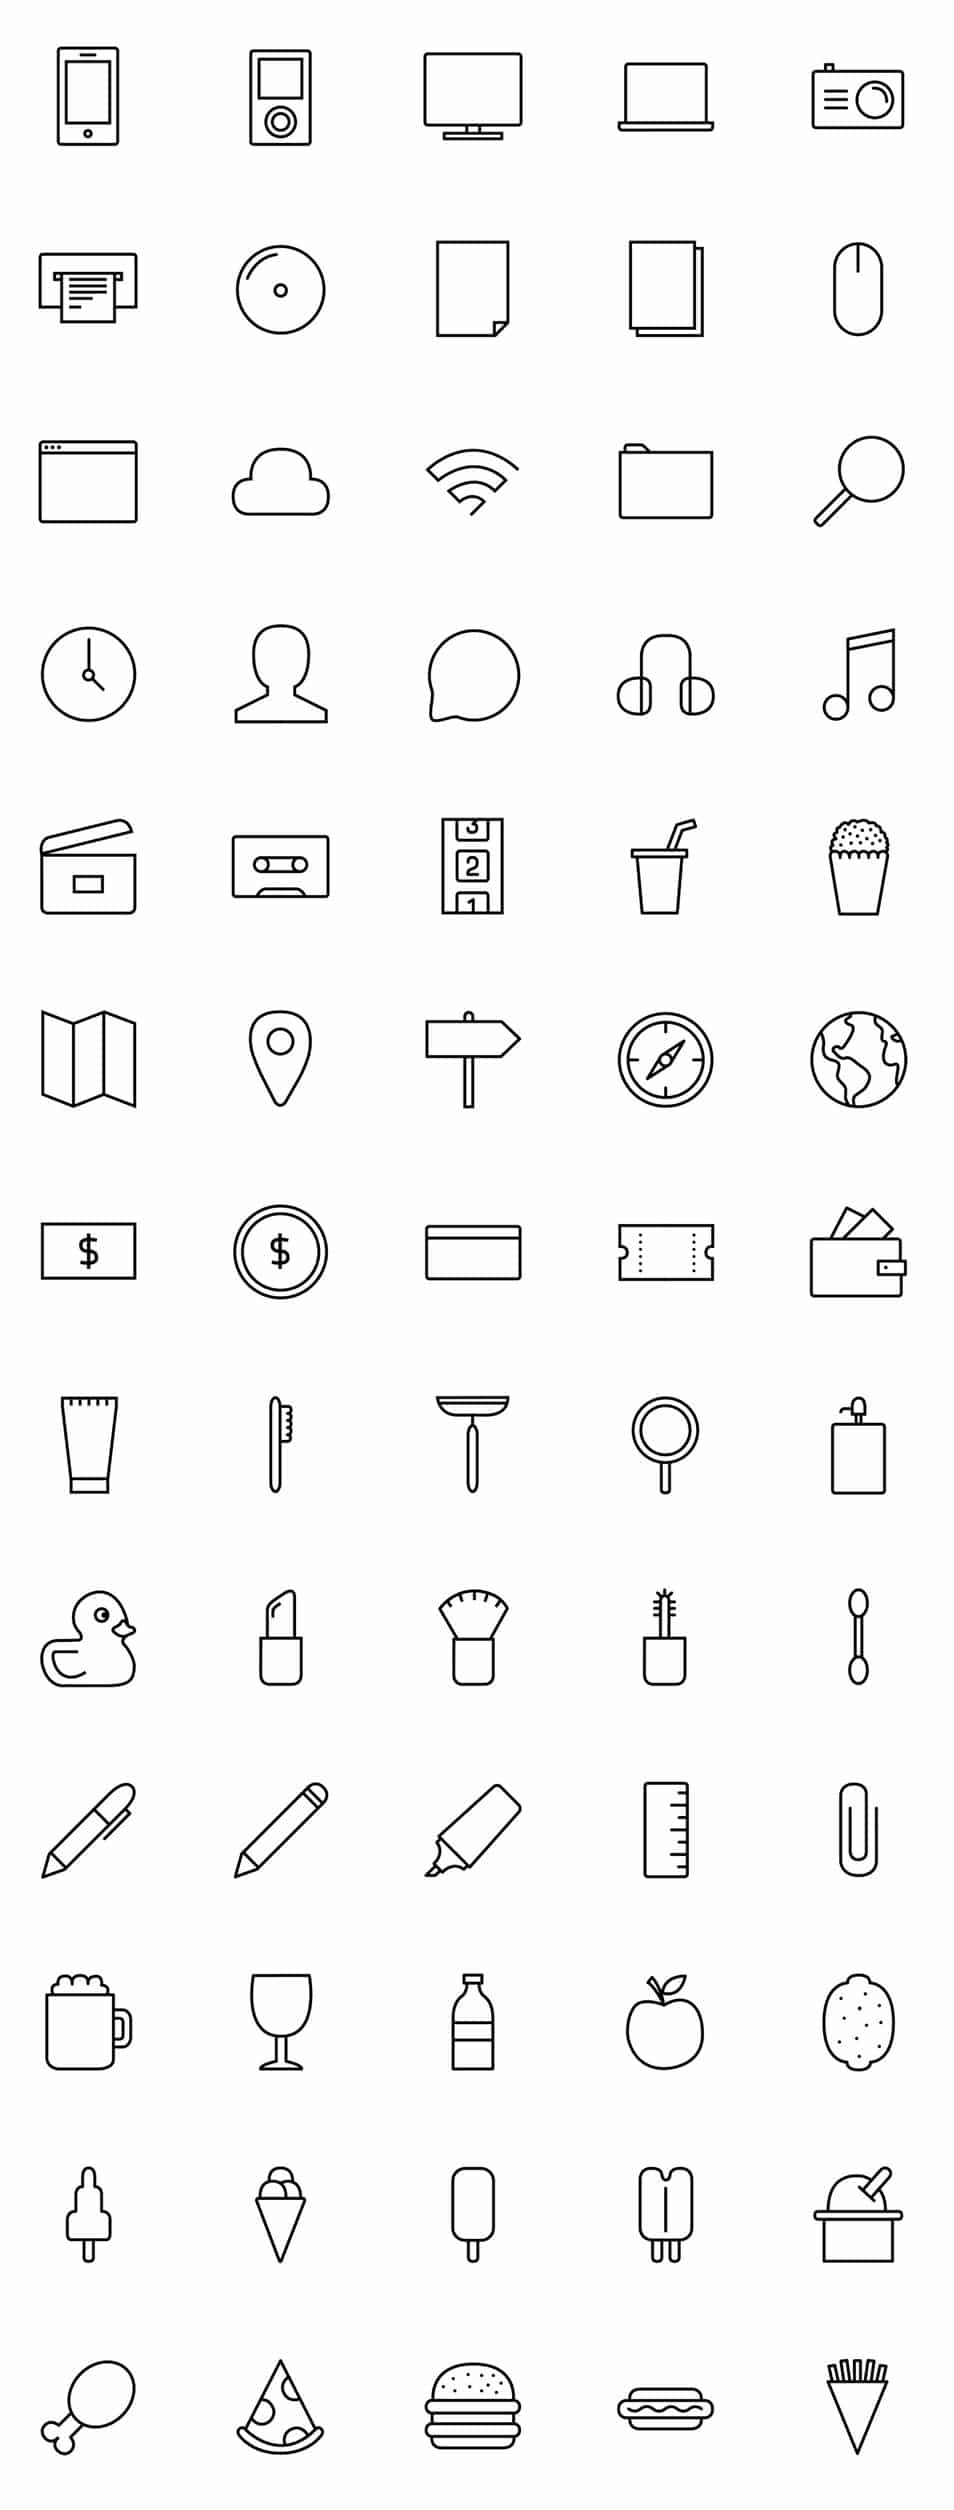 Stripes & Co – A Line-Styled Icon Set (65 Icons)